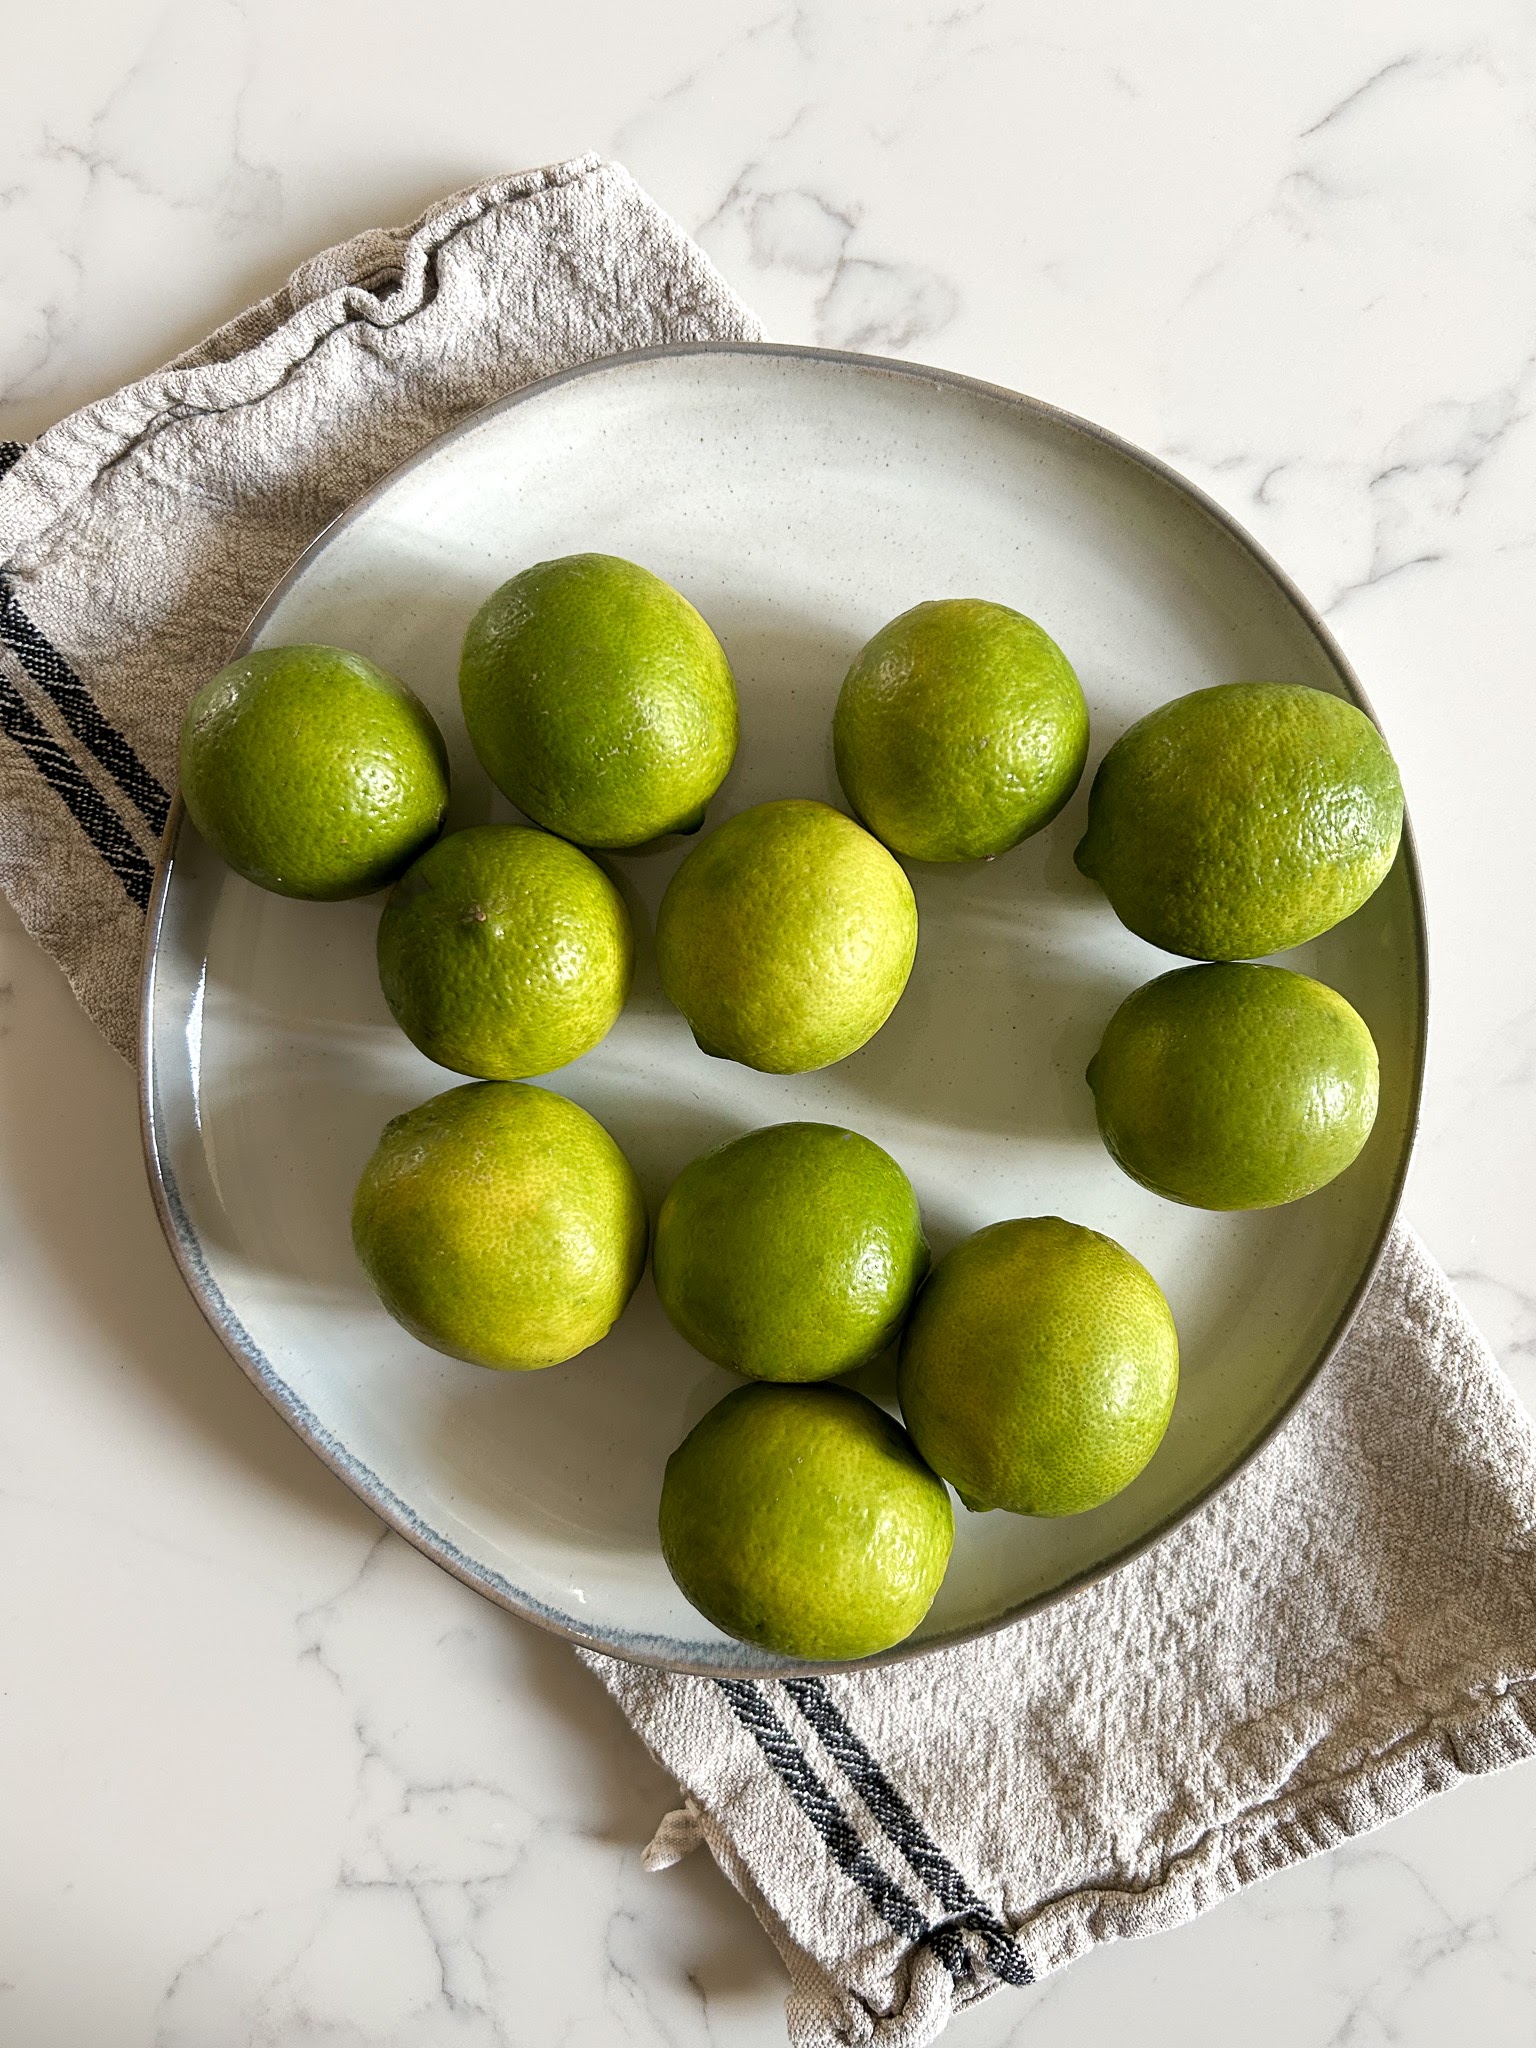 Limes for Marmalade